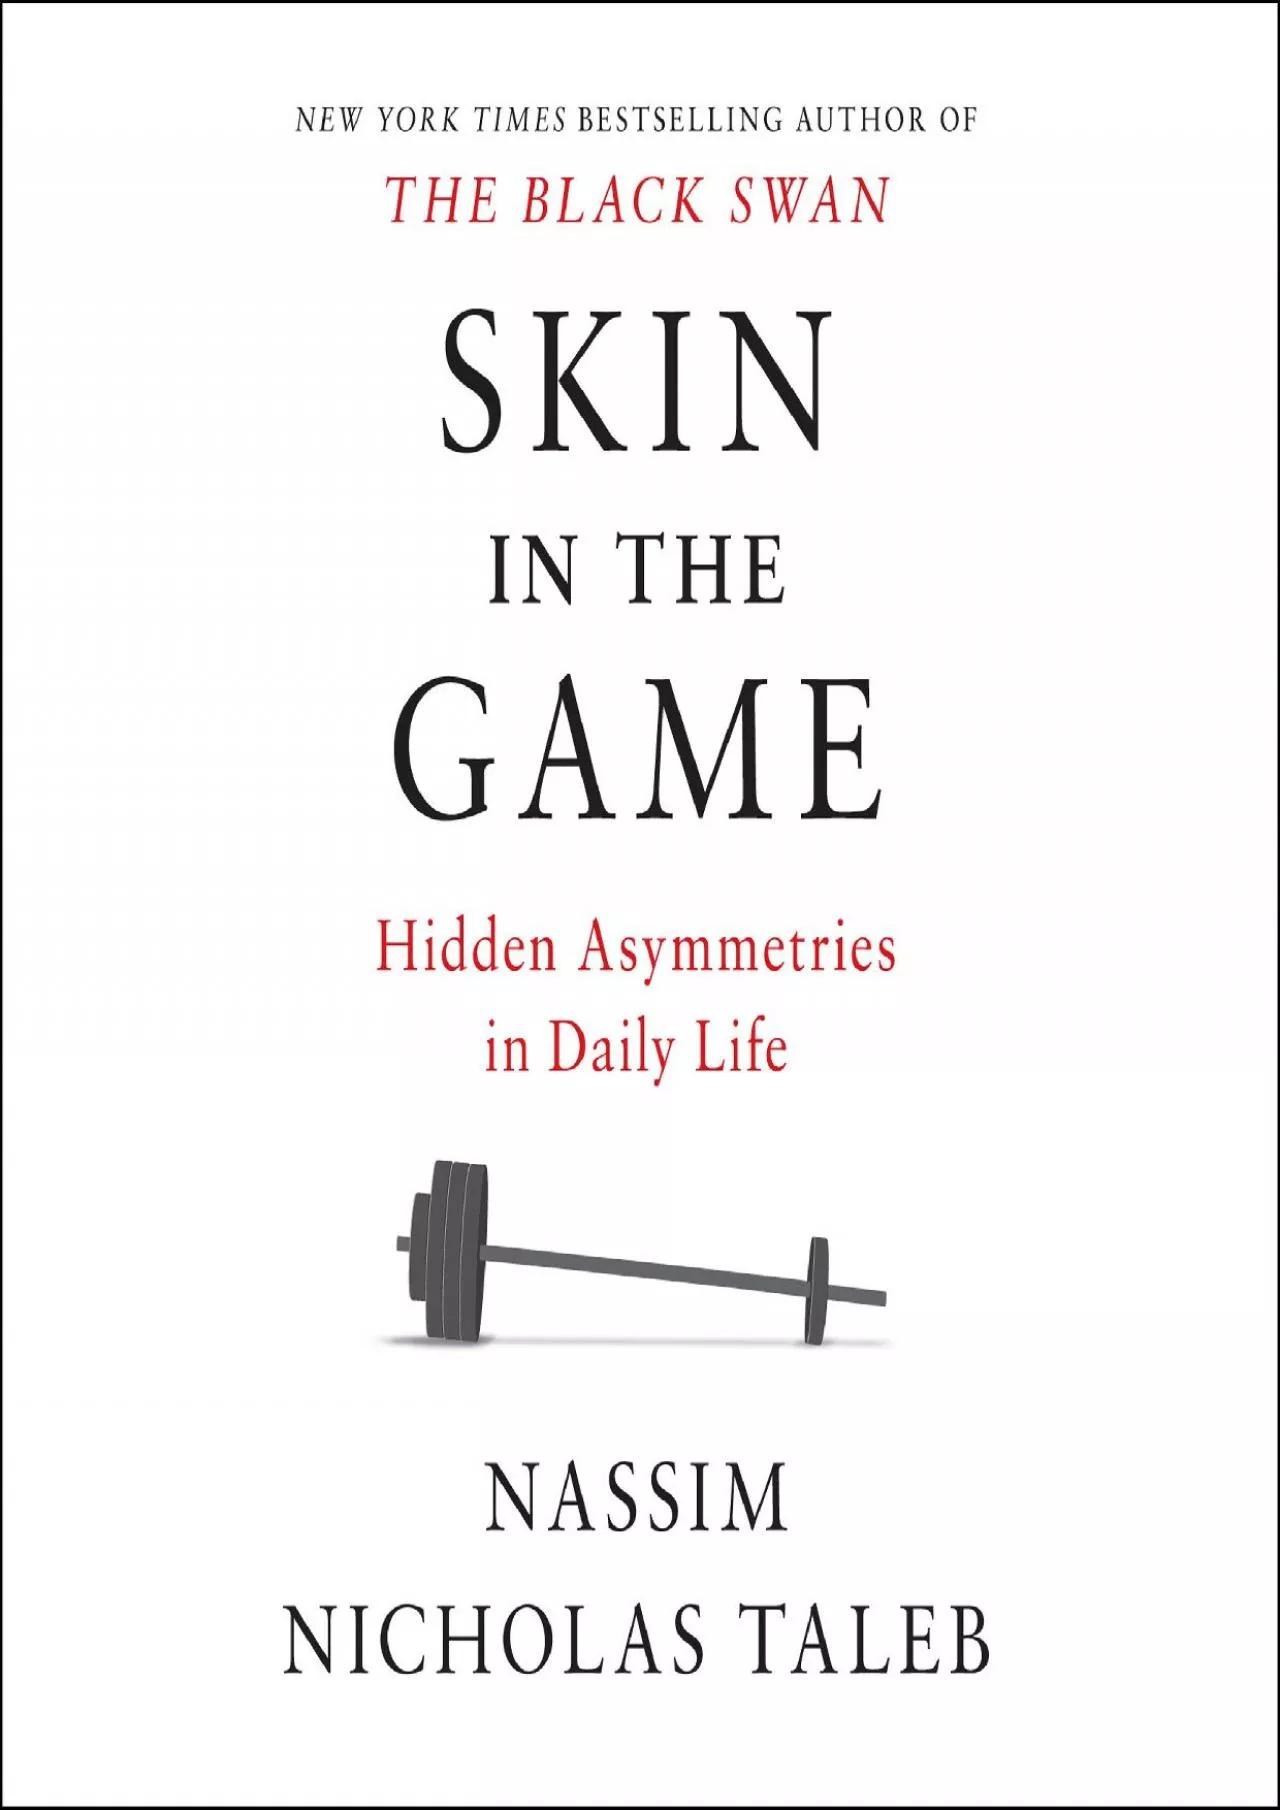 (BOOK)-Skin in the Game: Hidden Asymmetries in Daily Life